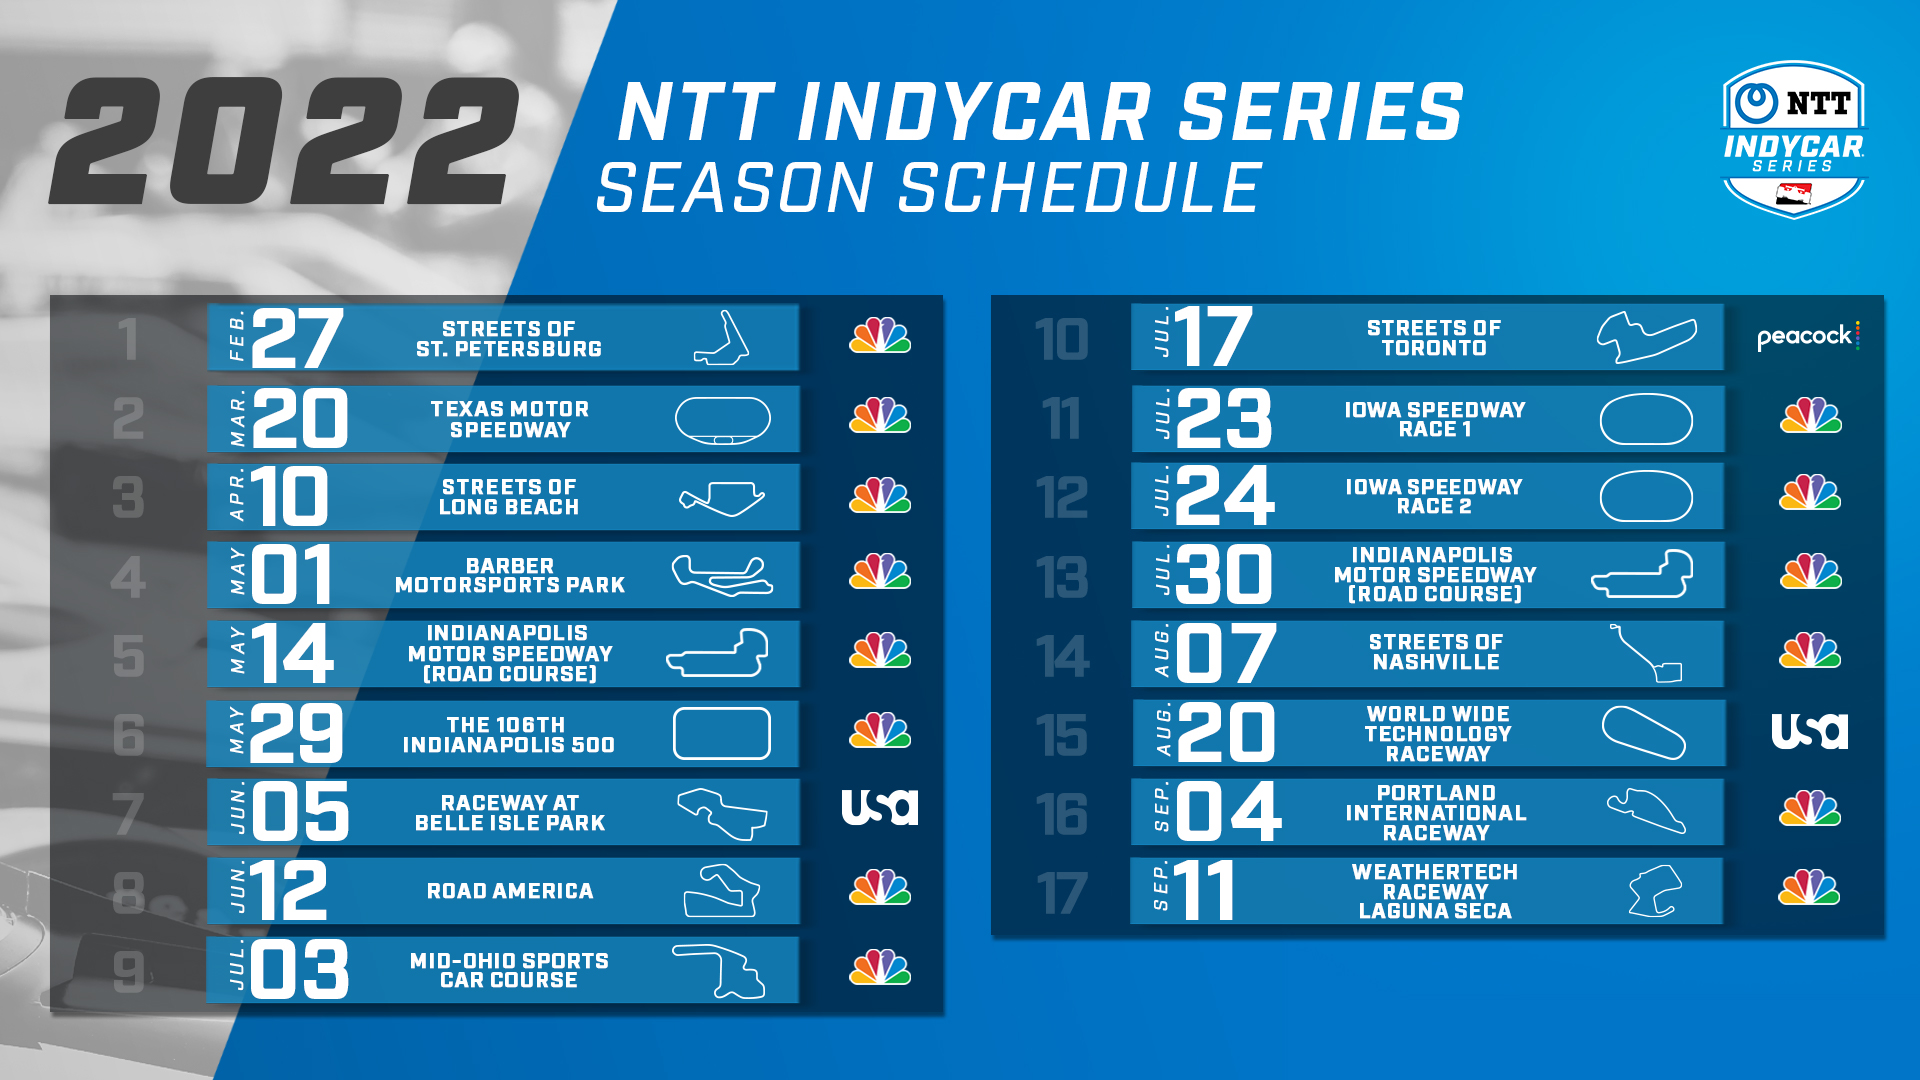 NBC Sports PR on Twitter: &quot;The 2022 @IndyCar schedule features a record 14 races on broadcast network NBC, headlined by the 106th Running of the Indianapolis 500 on May 29. Full details